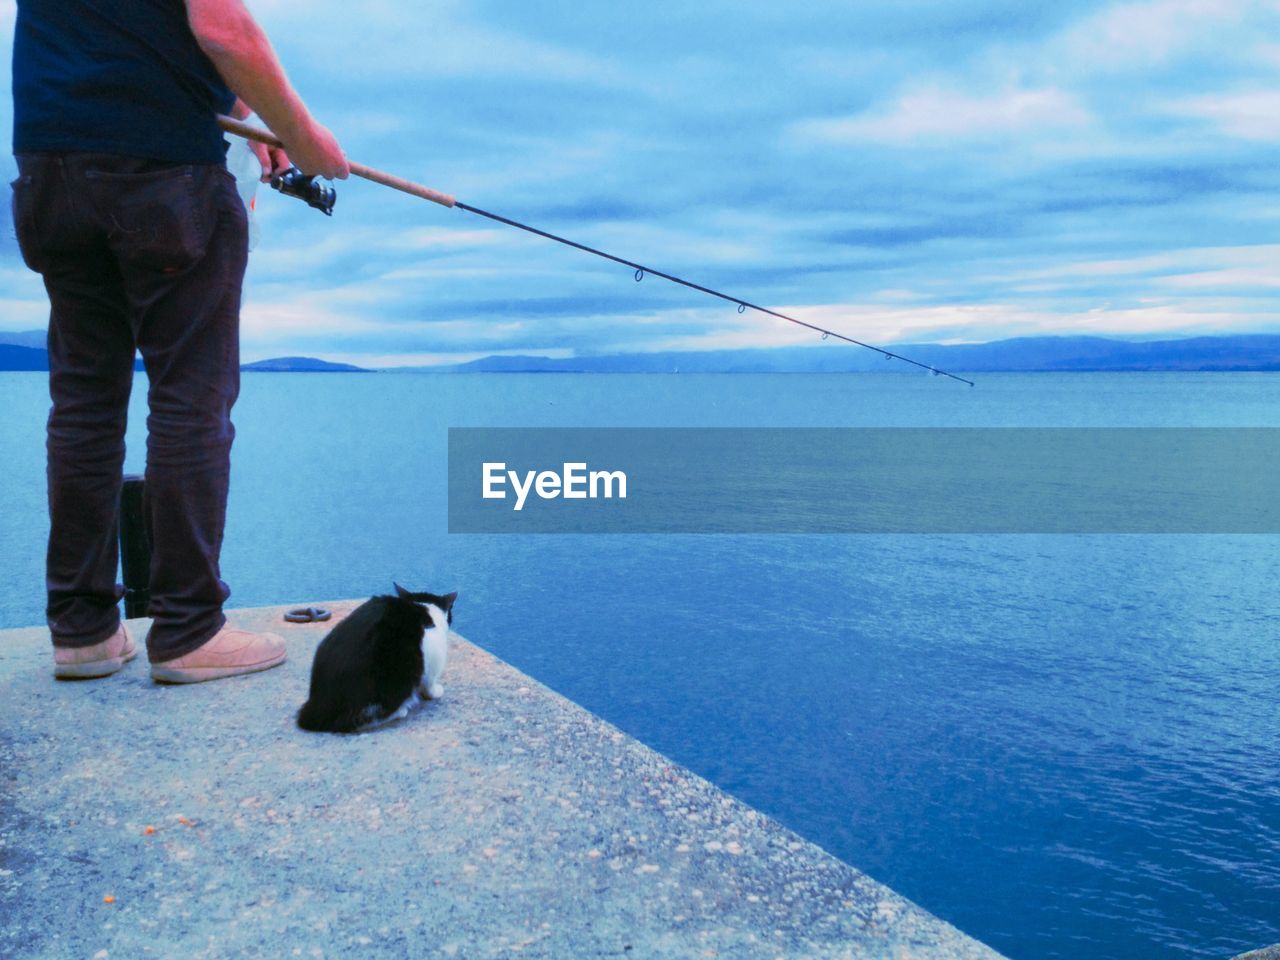 Man fishing on sea against sky with a cat